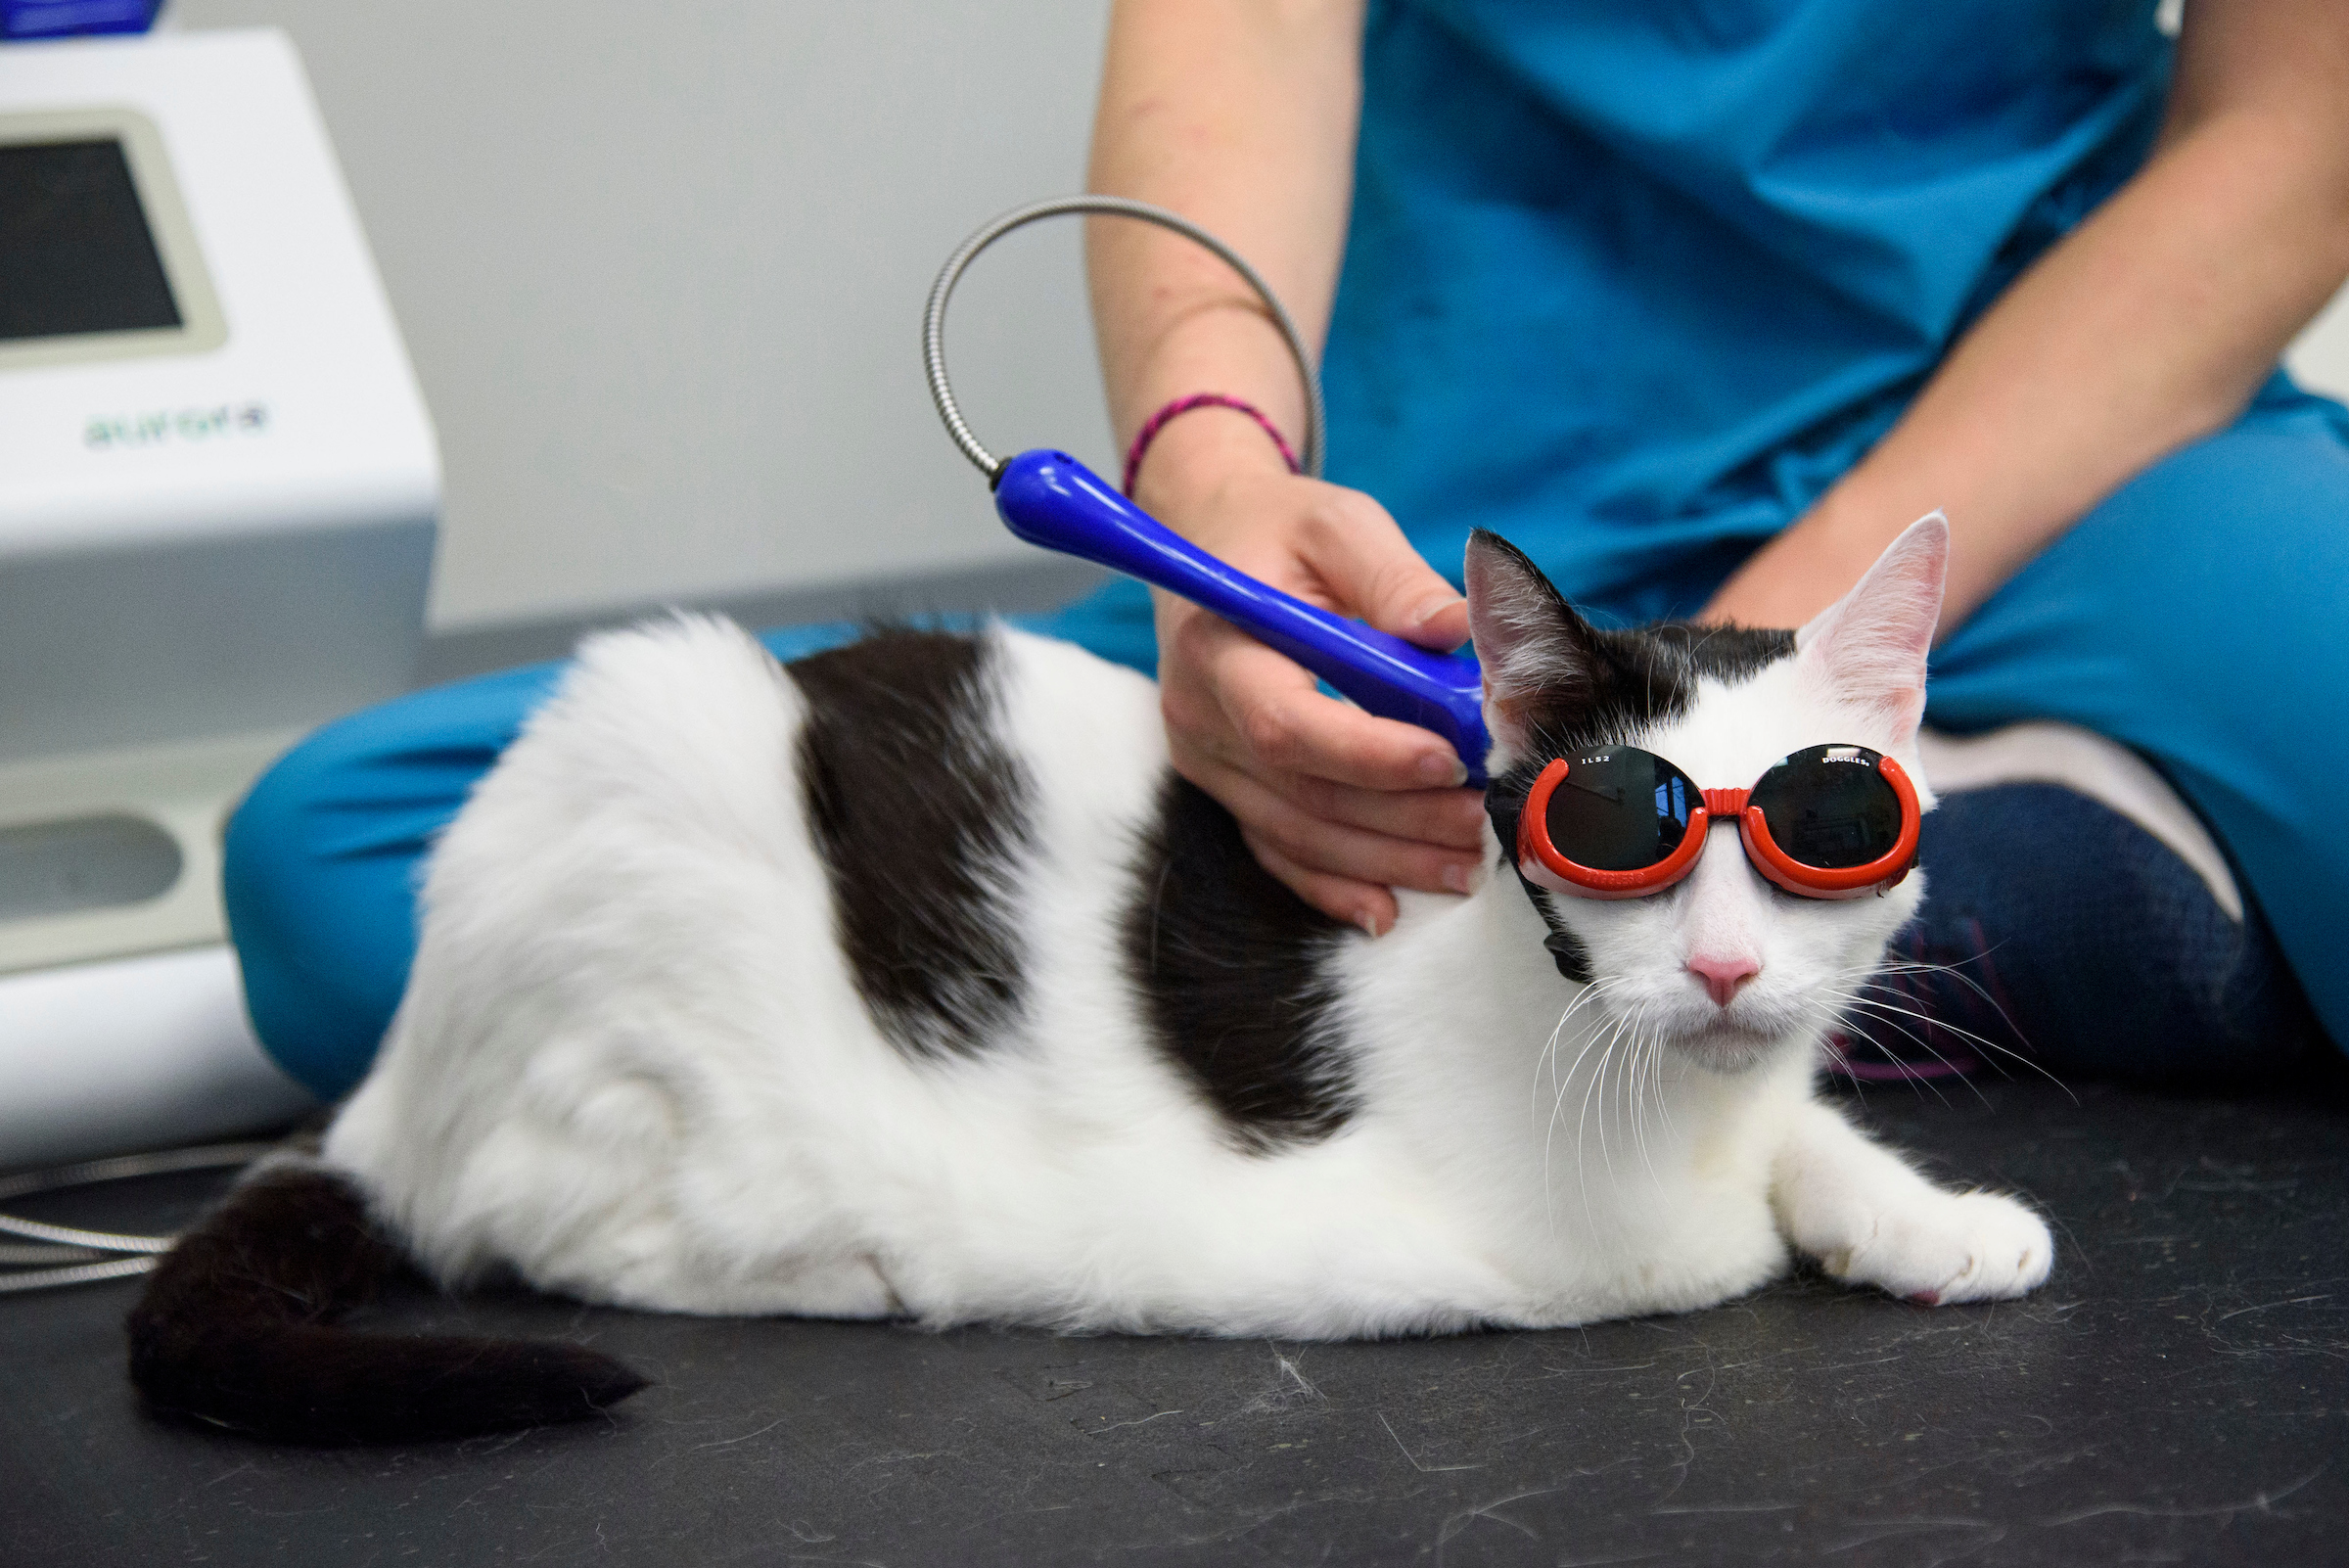 A cat receives laser therapy treatment